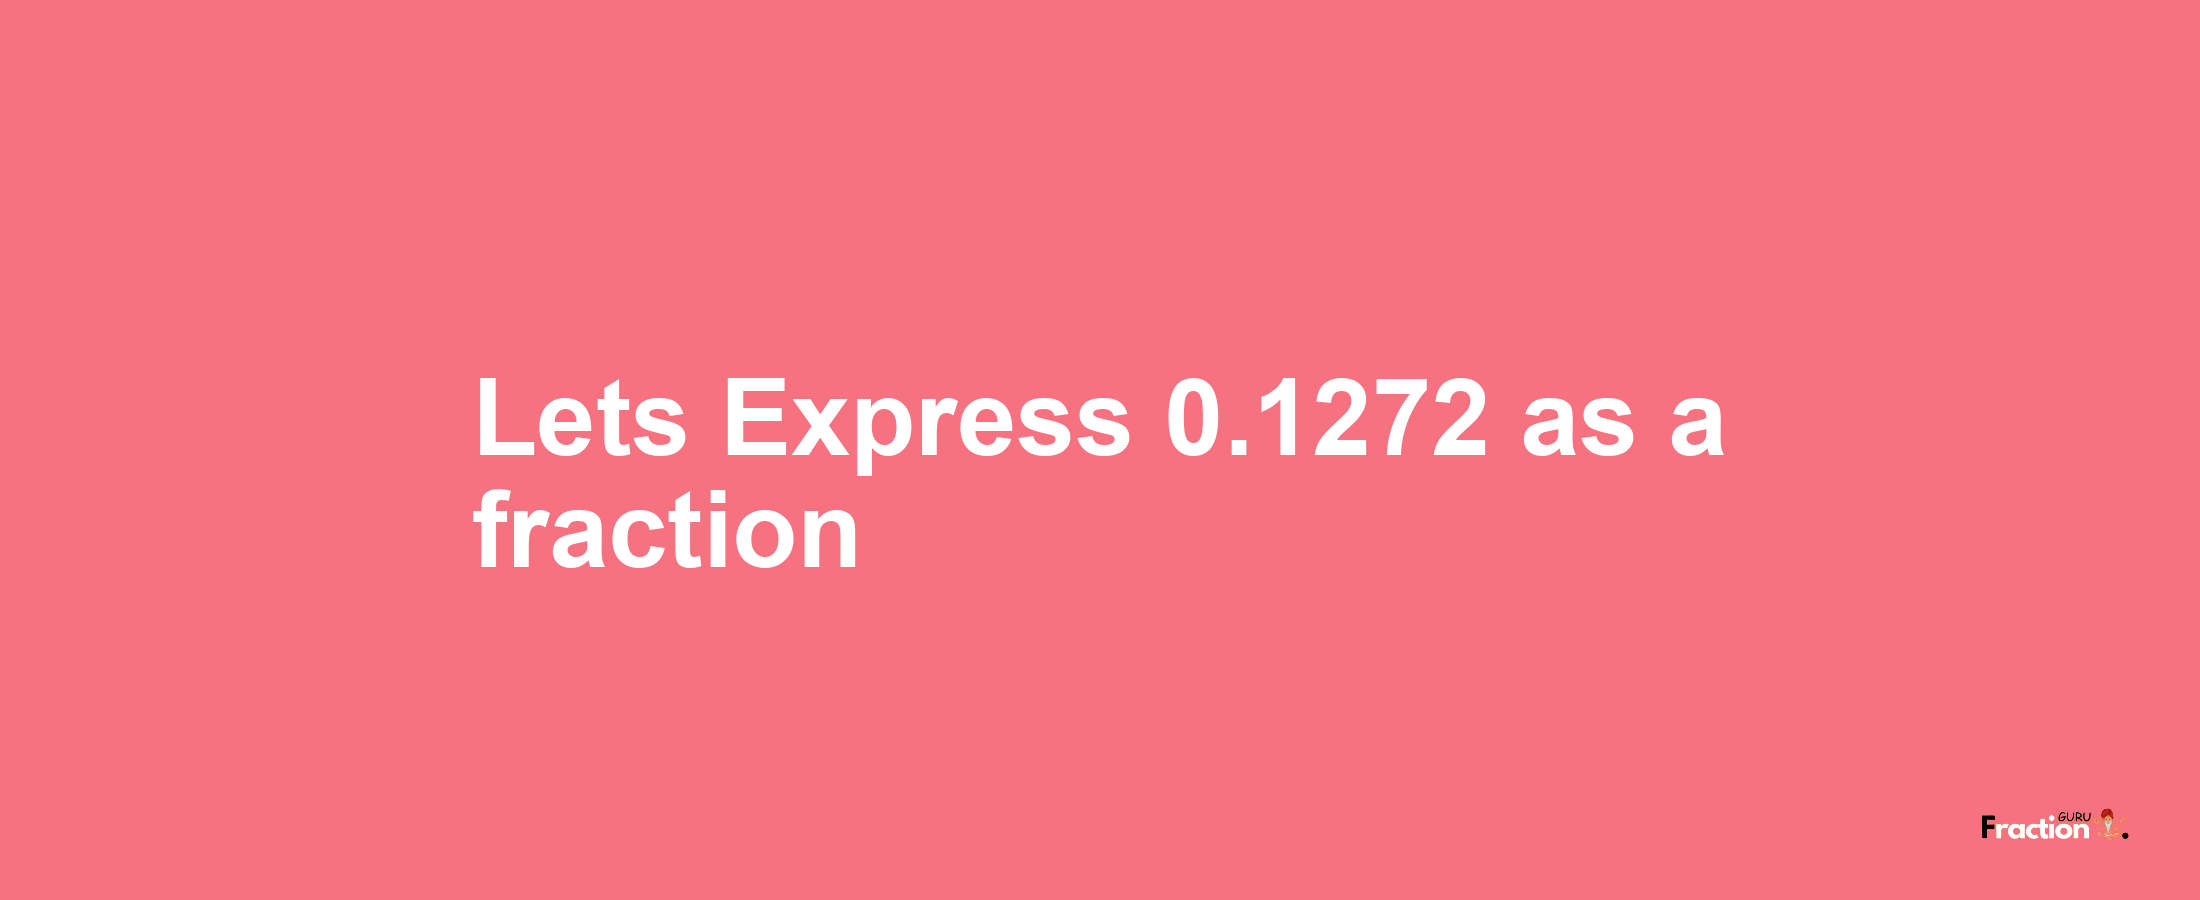 Lets Express 0.1272 as afraction